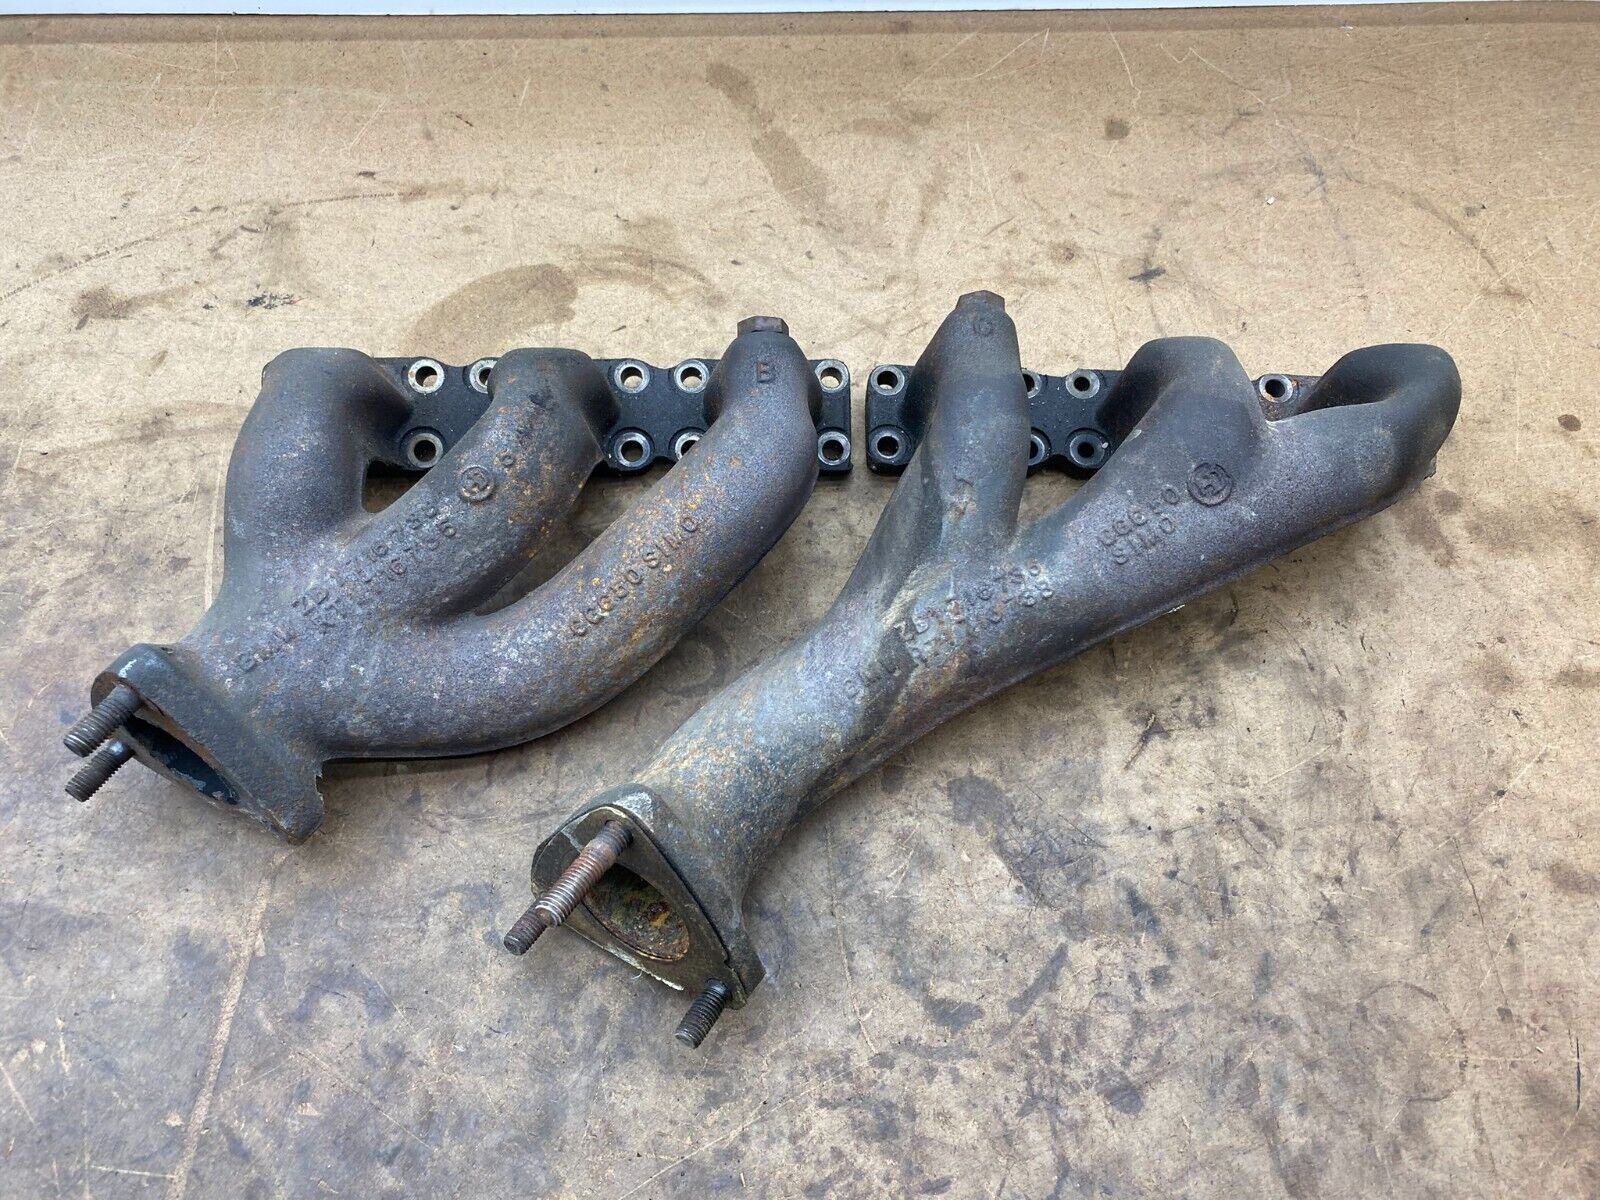 92-95 BMW E36 E34 325I M50 HEADERS Cast Iron EXHAUST Manifold 325 325is S50